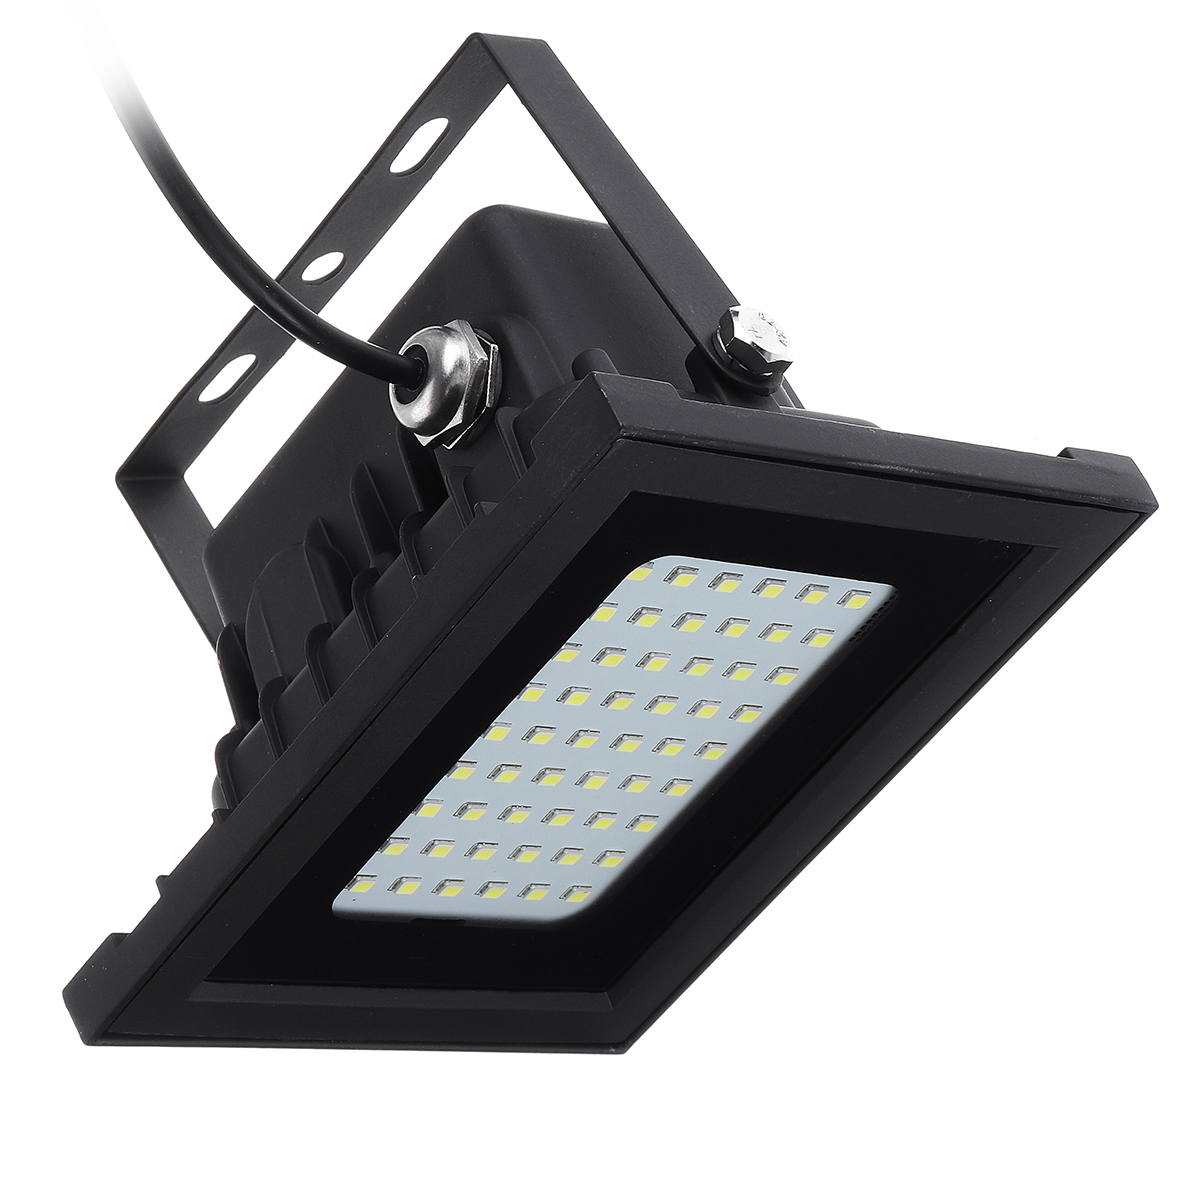 400LM 54 LED Solar Panel Flood Light Spotlight Project Lamp IP65 Waterproof Outdoor Camping Emergency Lantern With Remote Control 16